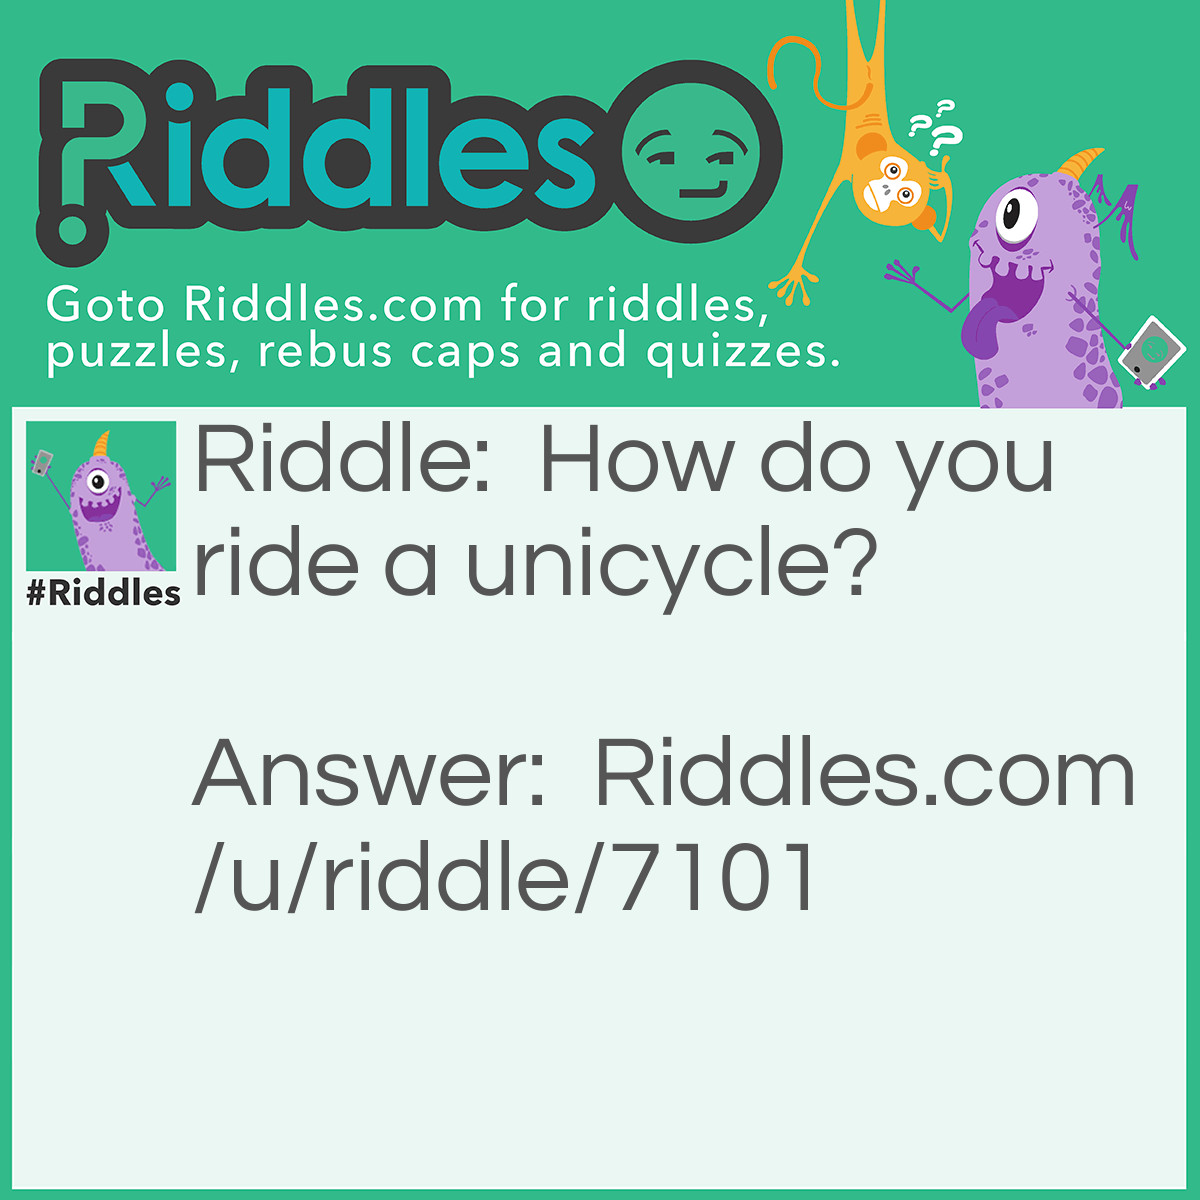 Riddle: How do you ride a unicycle? Answer: Trace your finger around a unicorn’s life cycle.